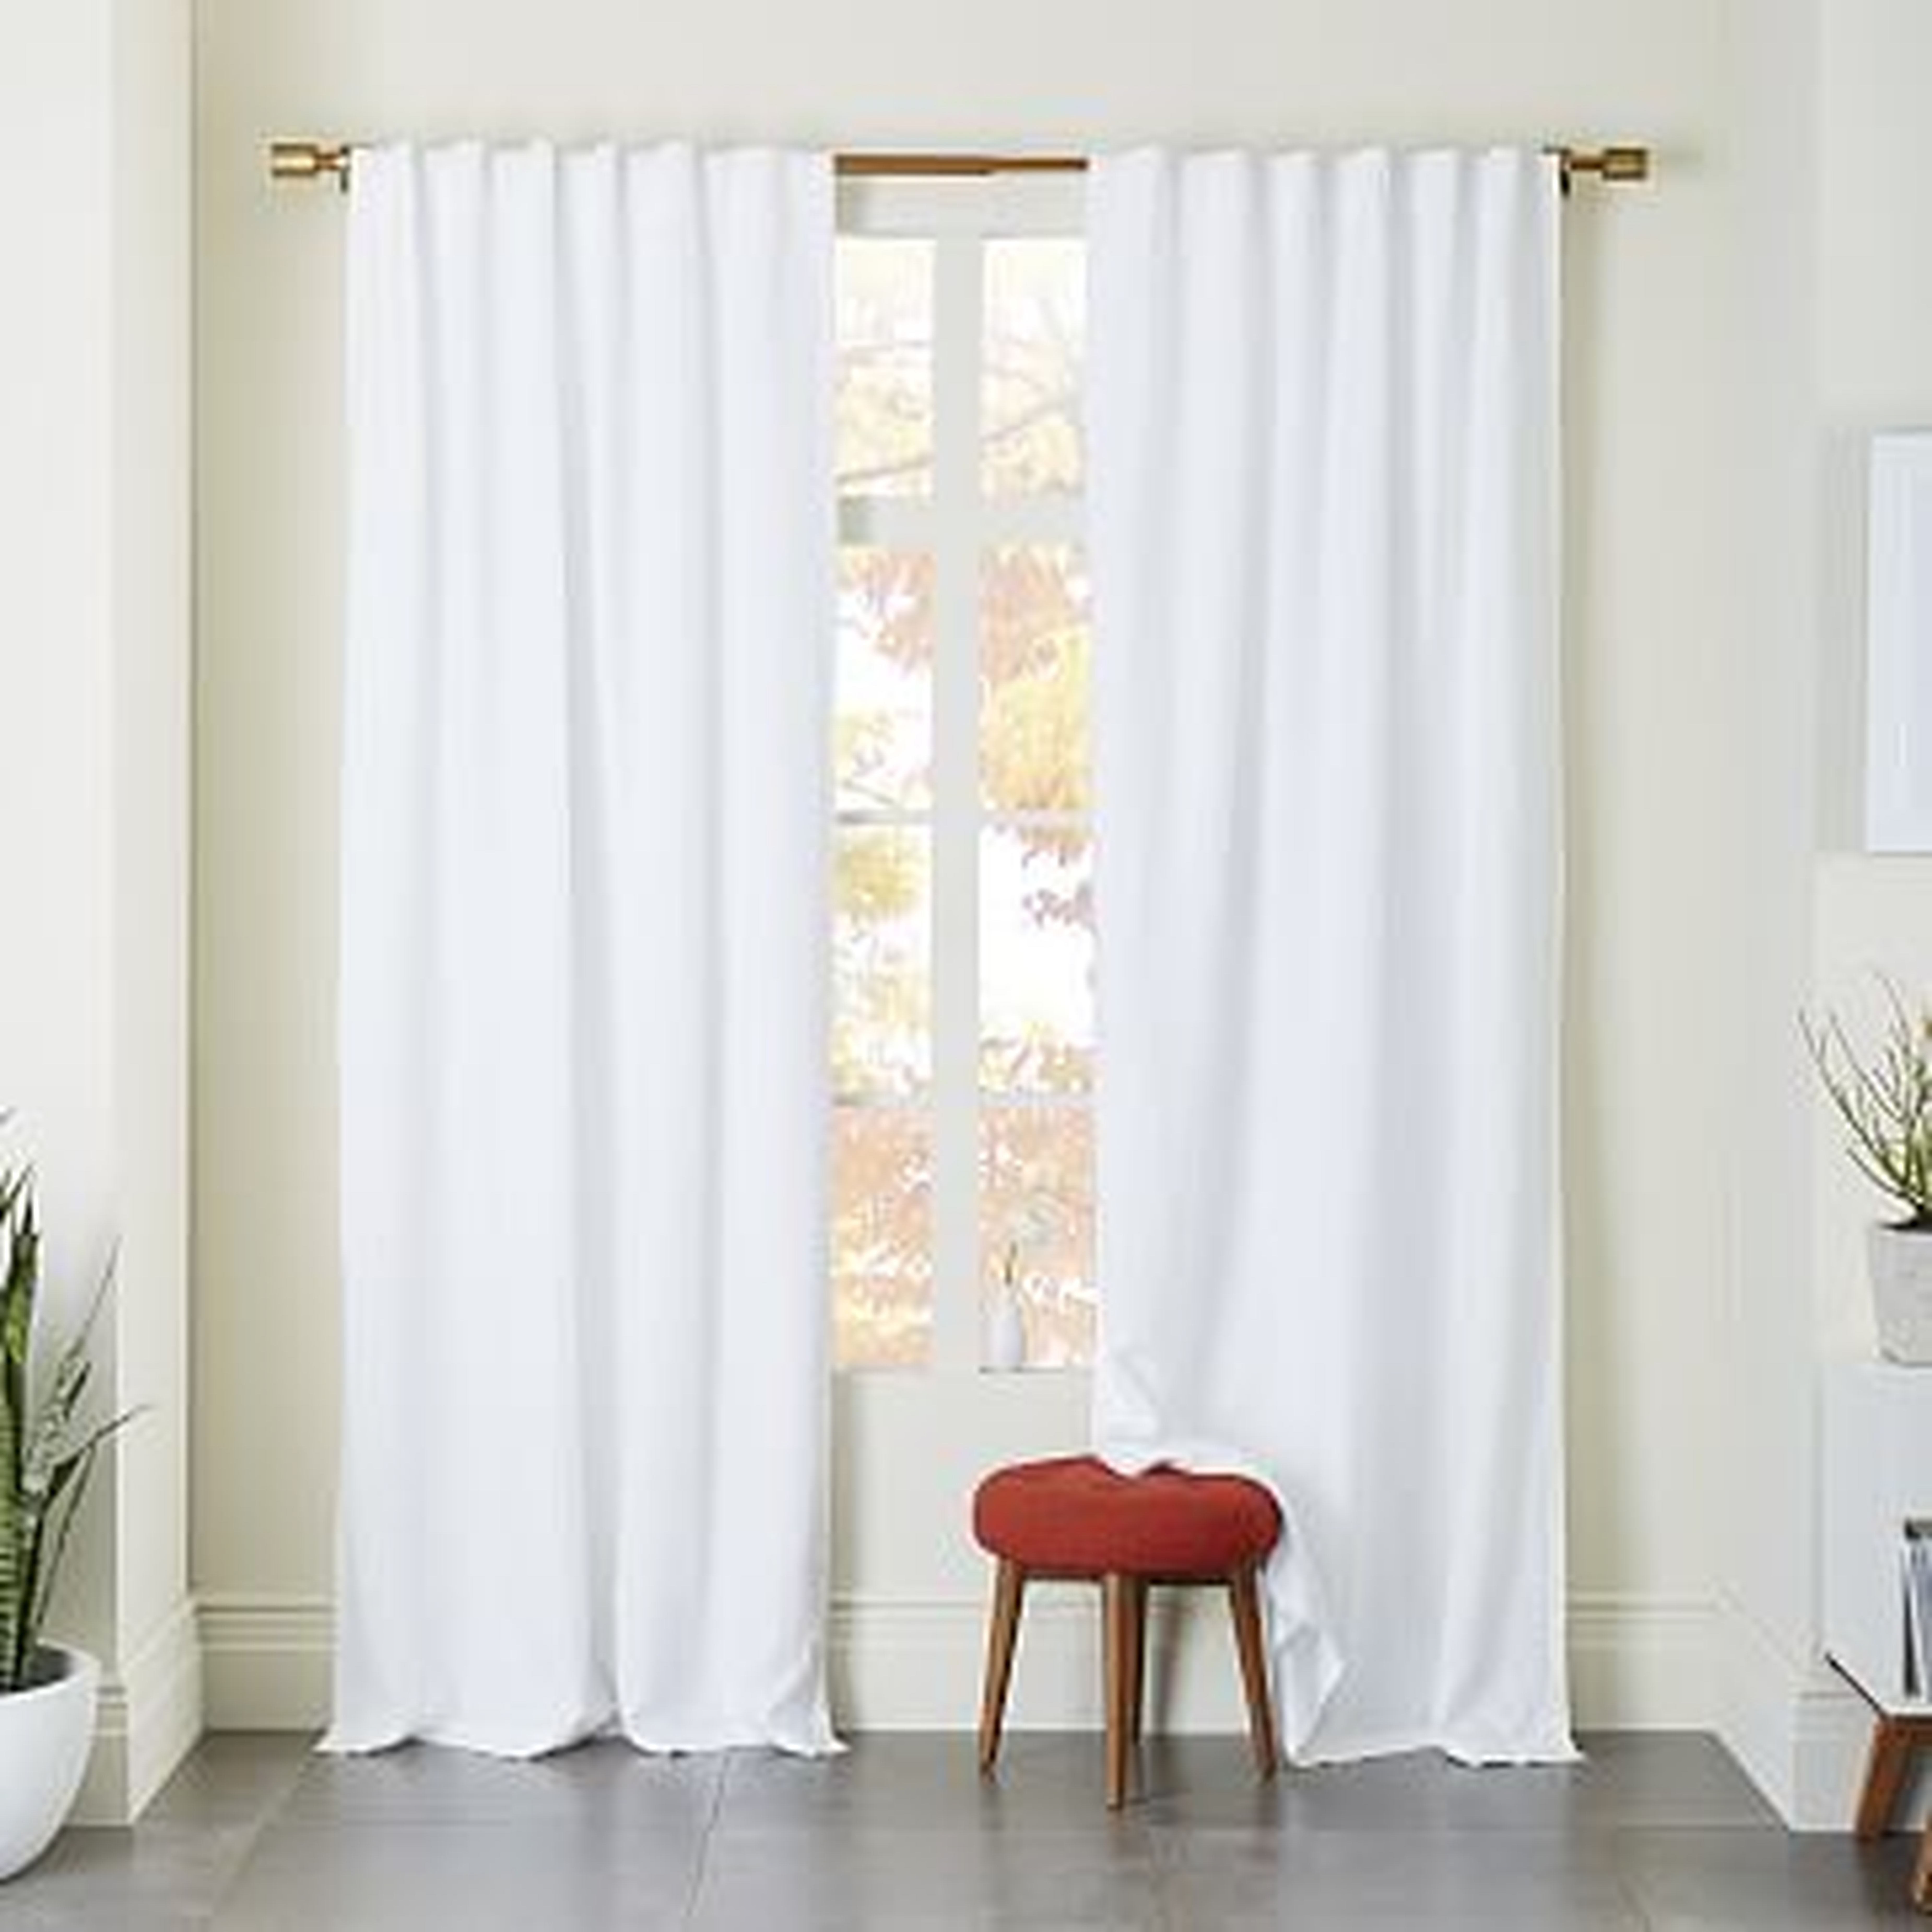 Belgian Flax Linen Curtain With Blackout, Set of 2, White, 48"x108" - West Elm